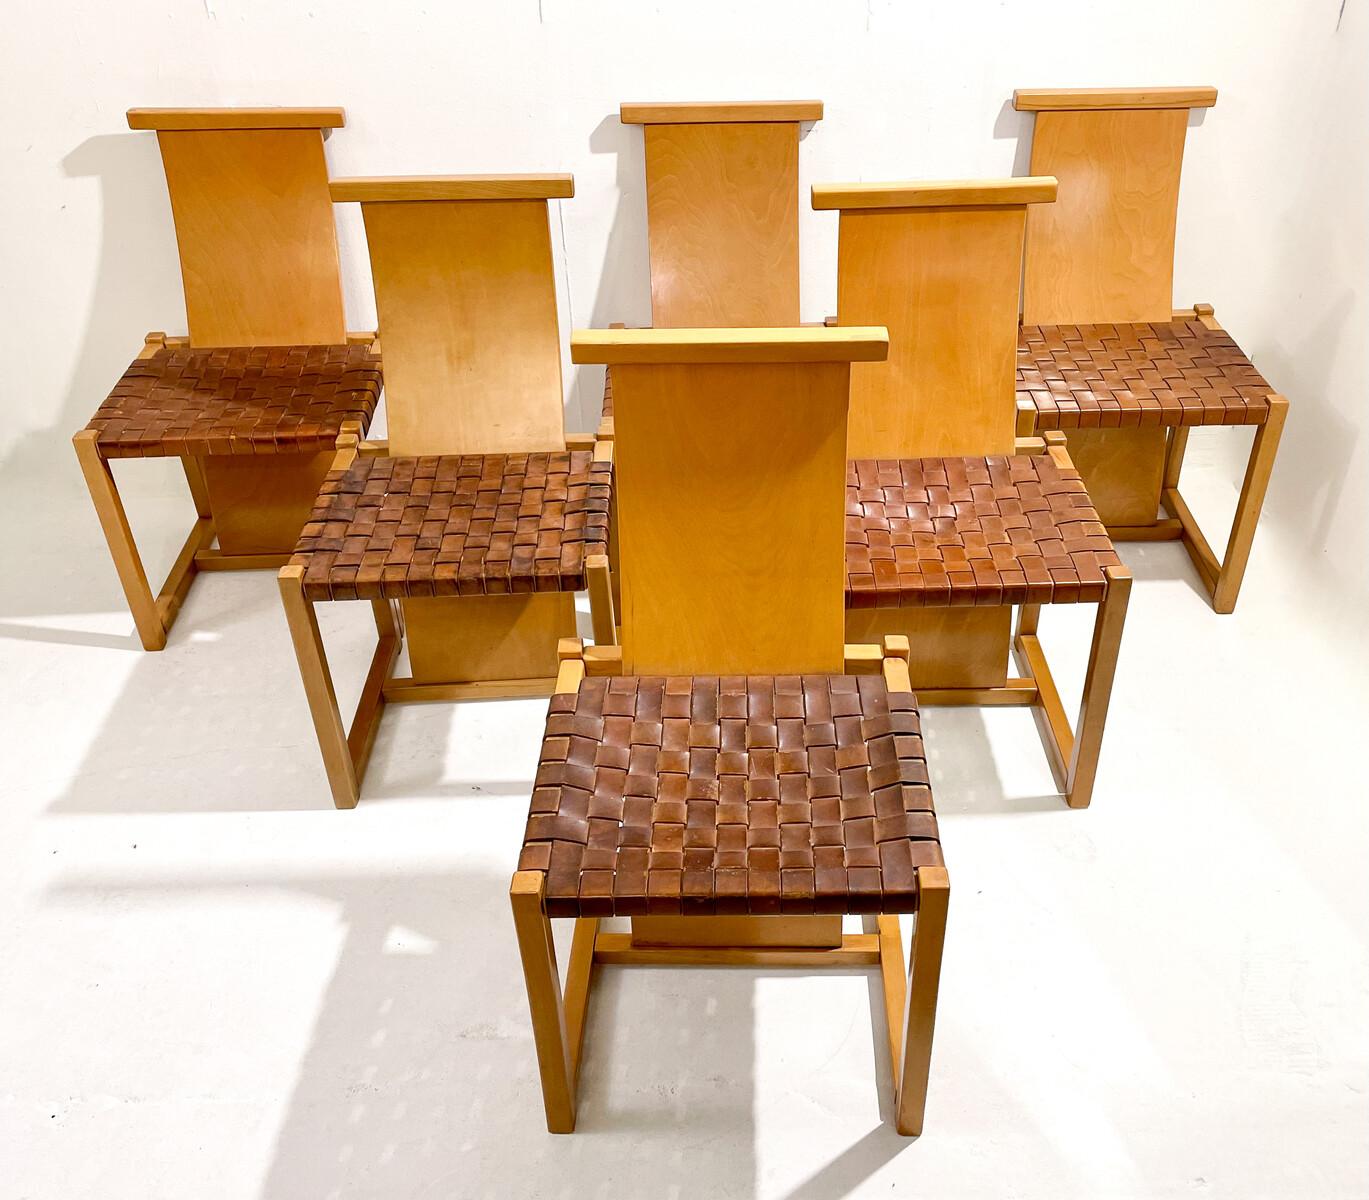 Mid-Century Modern Set of 6 wood and leather chairs, Italy, 1950s.